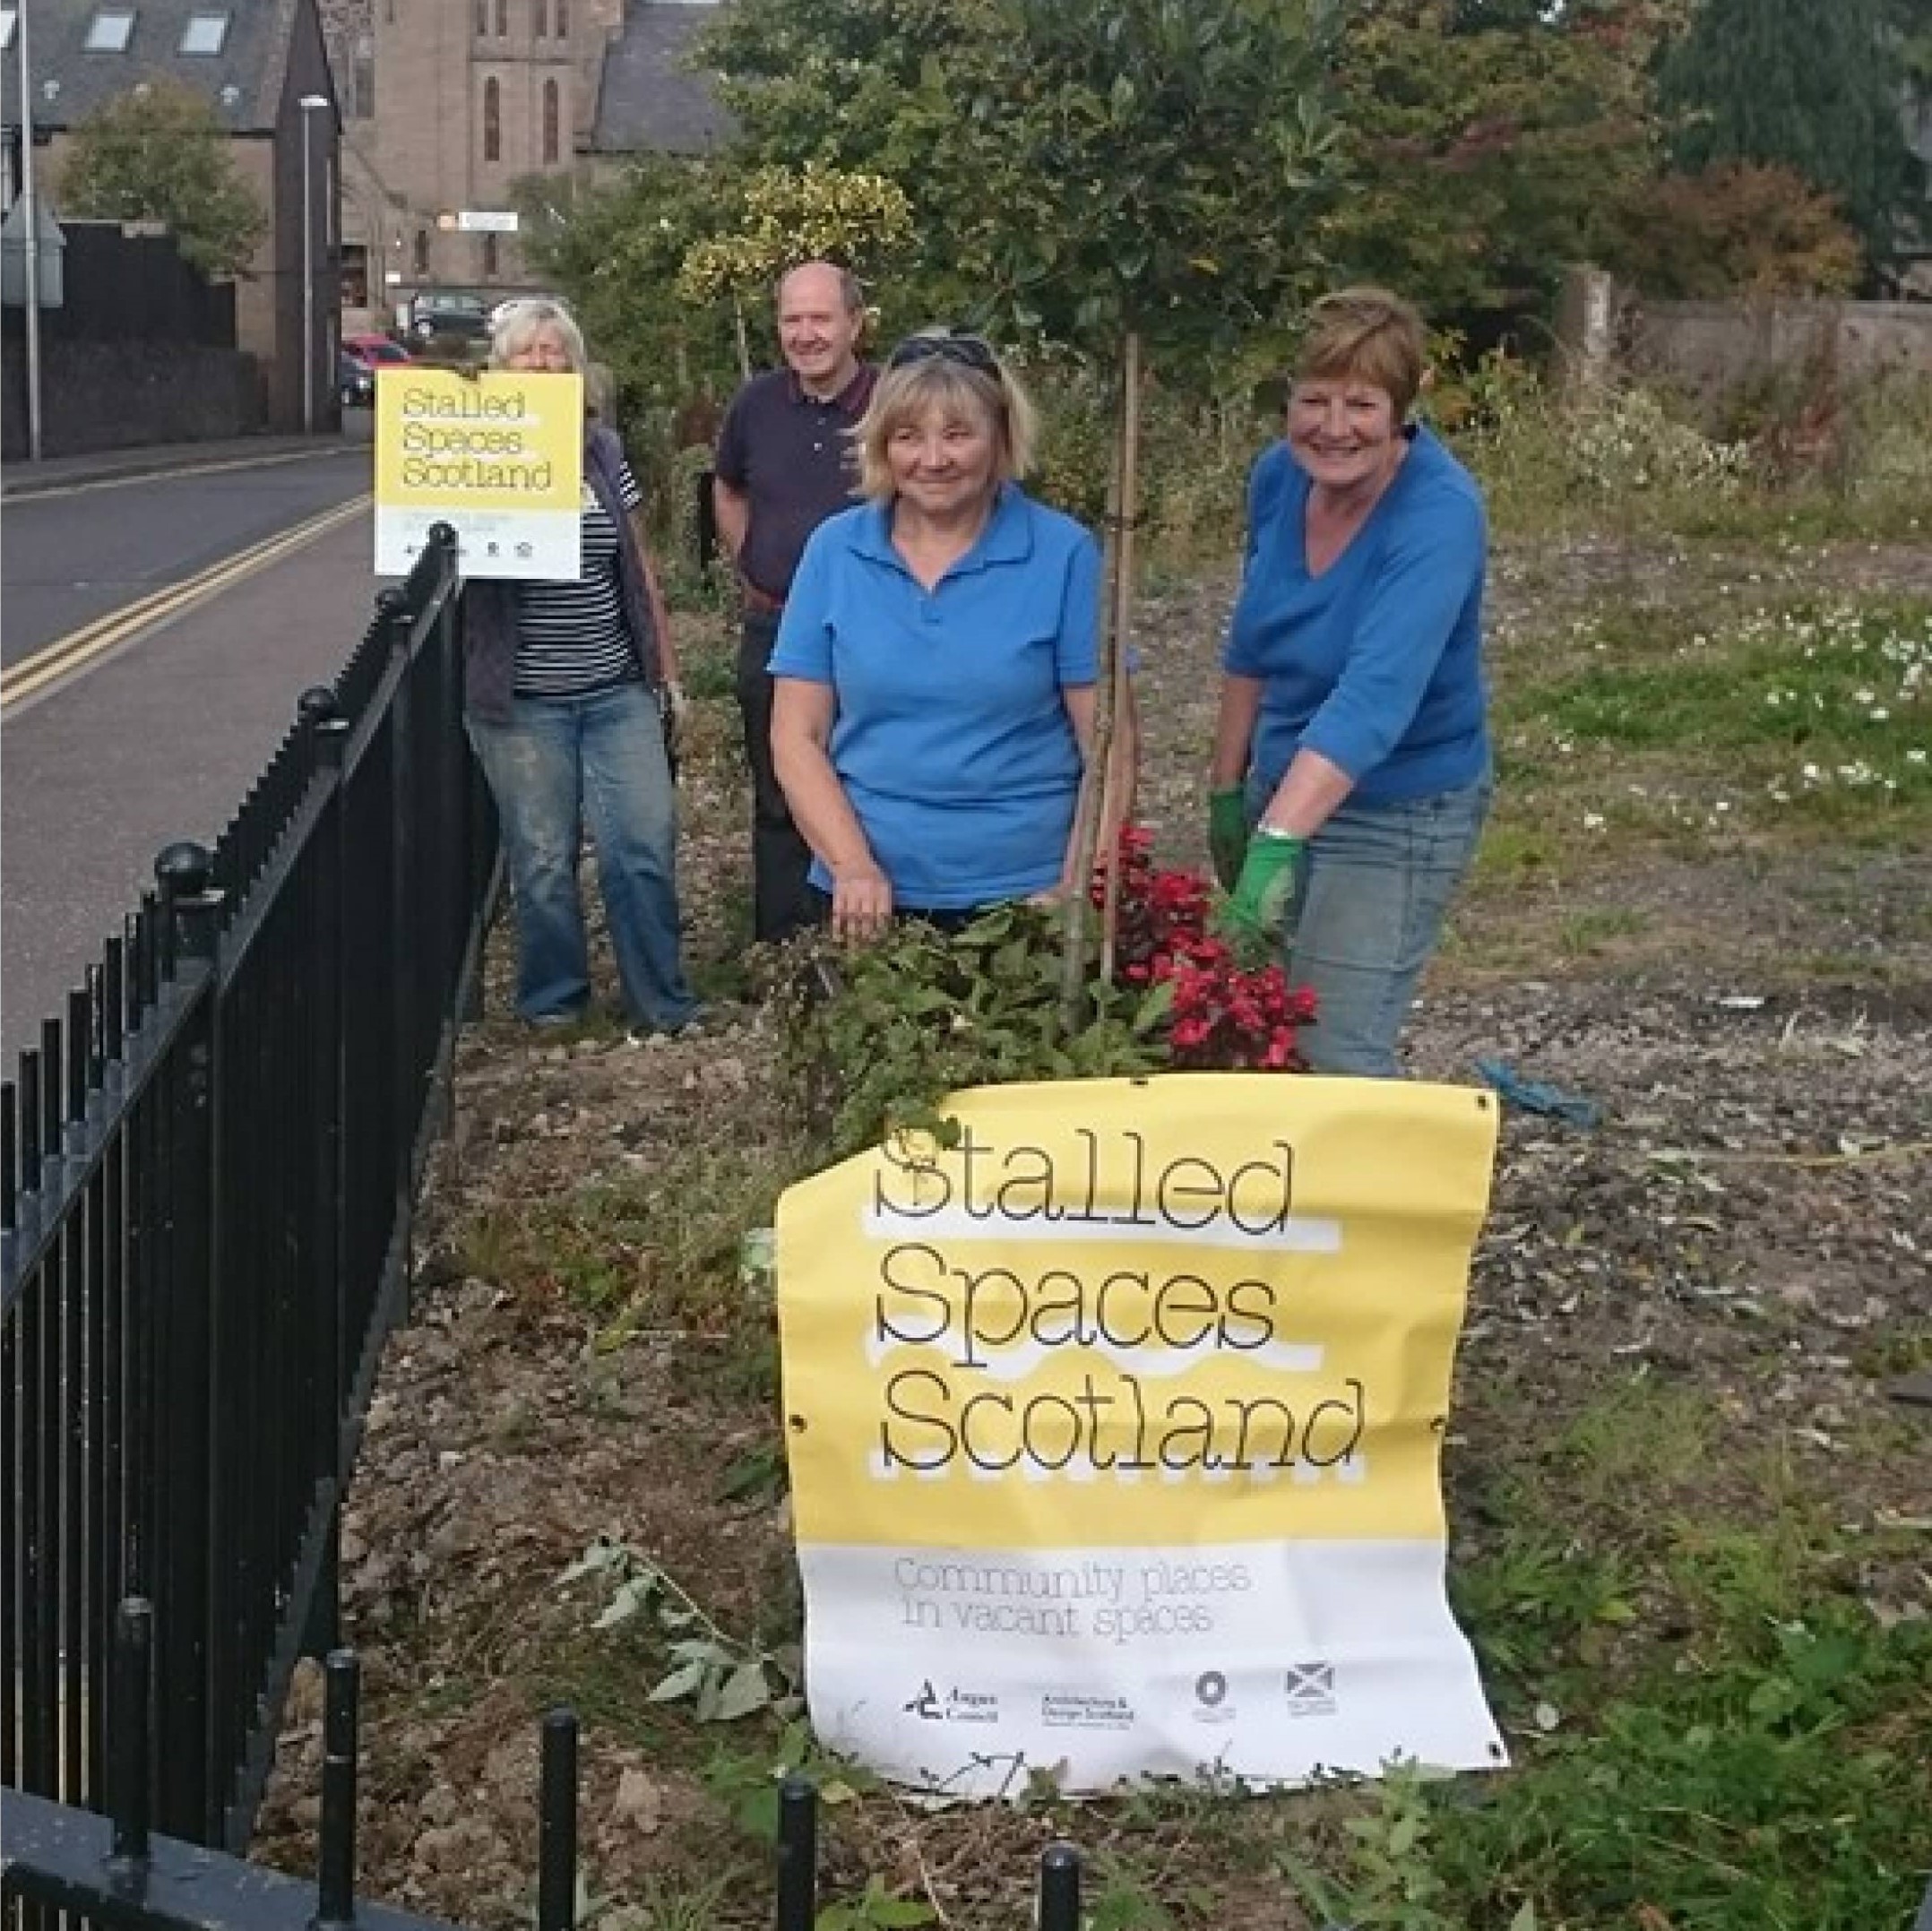 Two women from the Forfar in Flower project hold up a Stalled Spaces Scotland sign in a soon to be green space by a road.